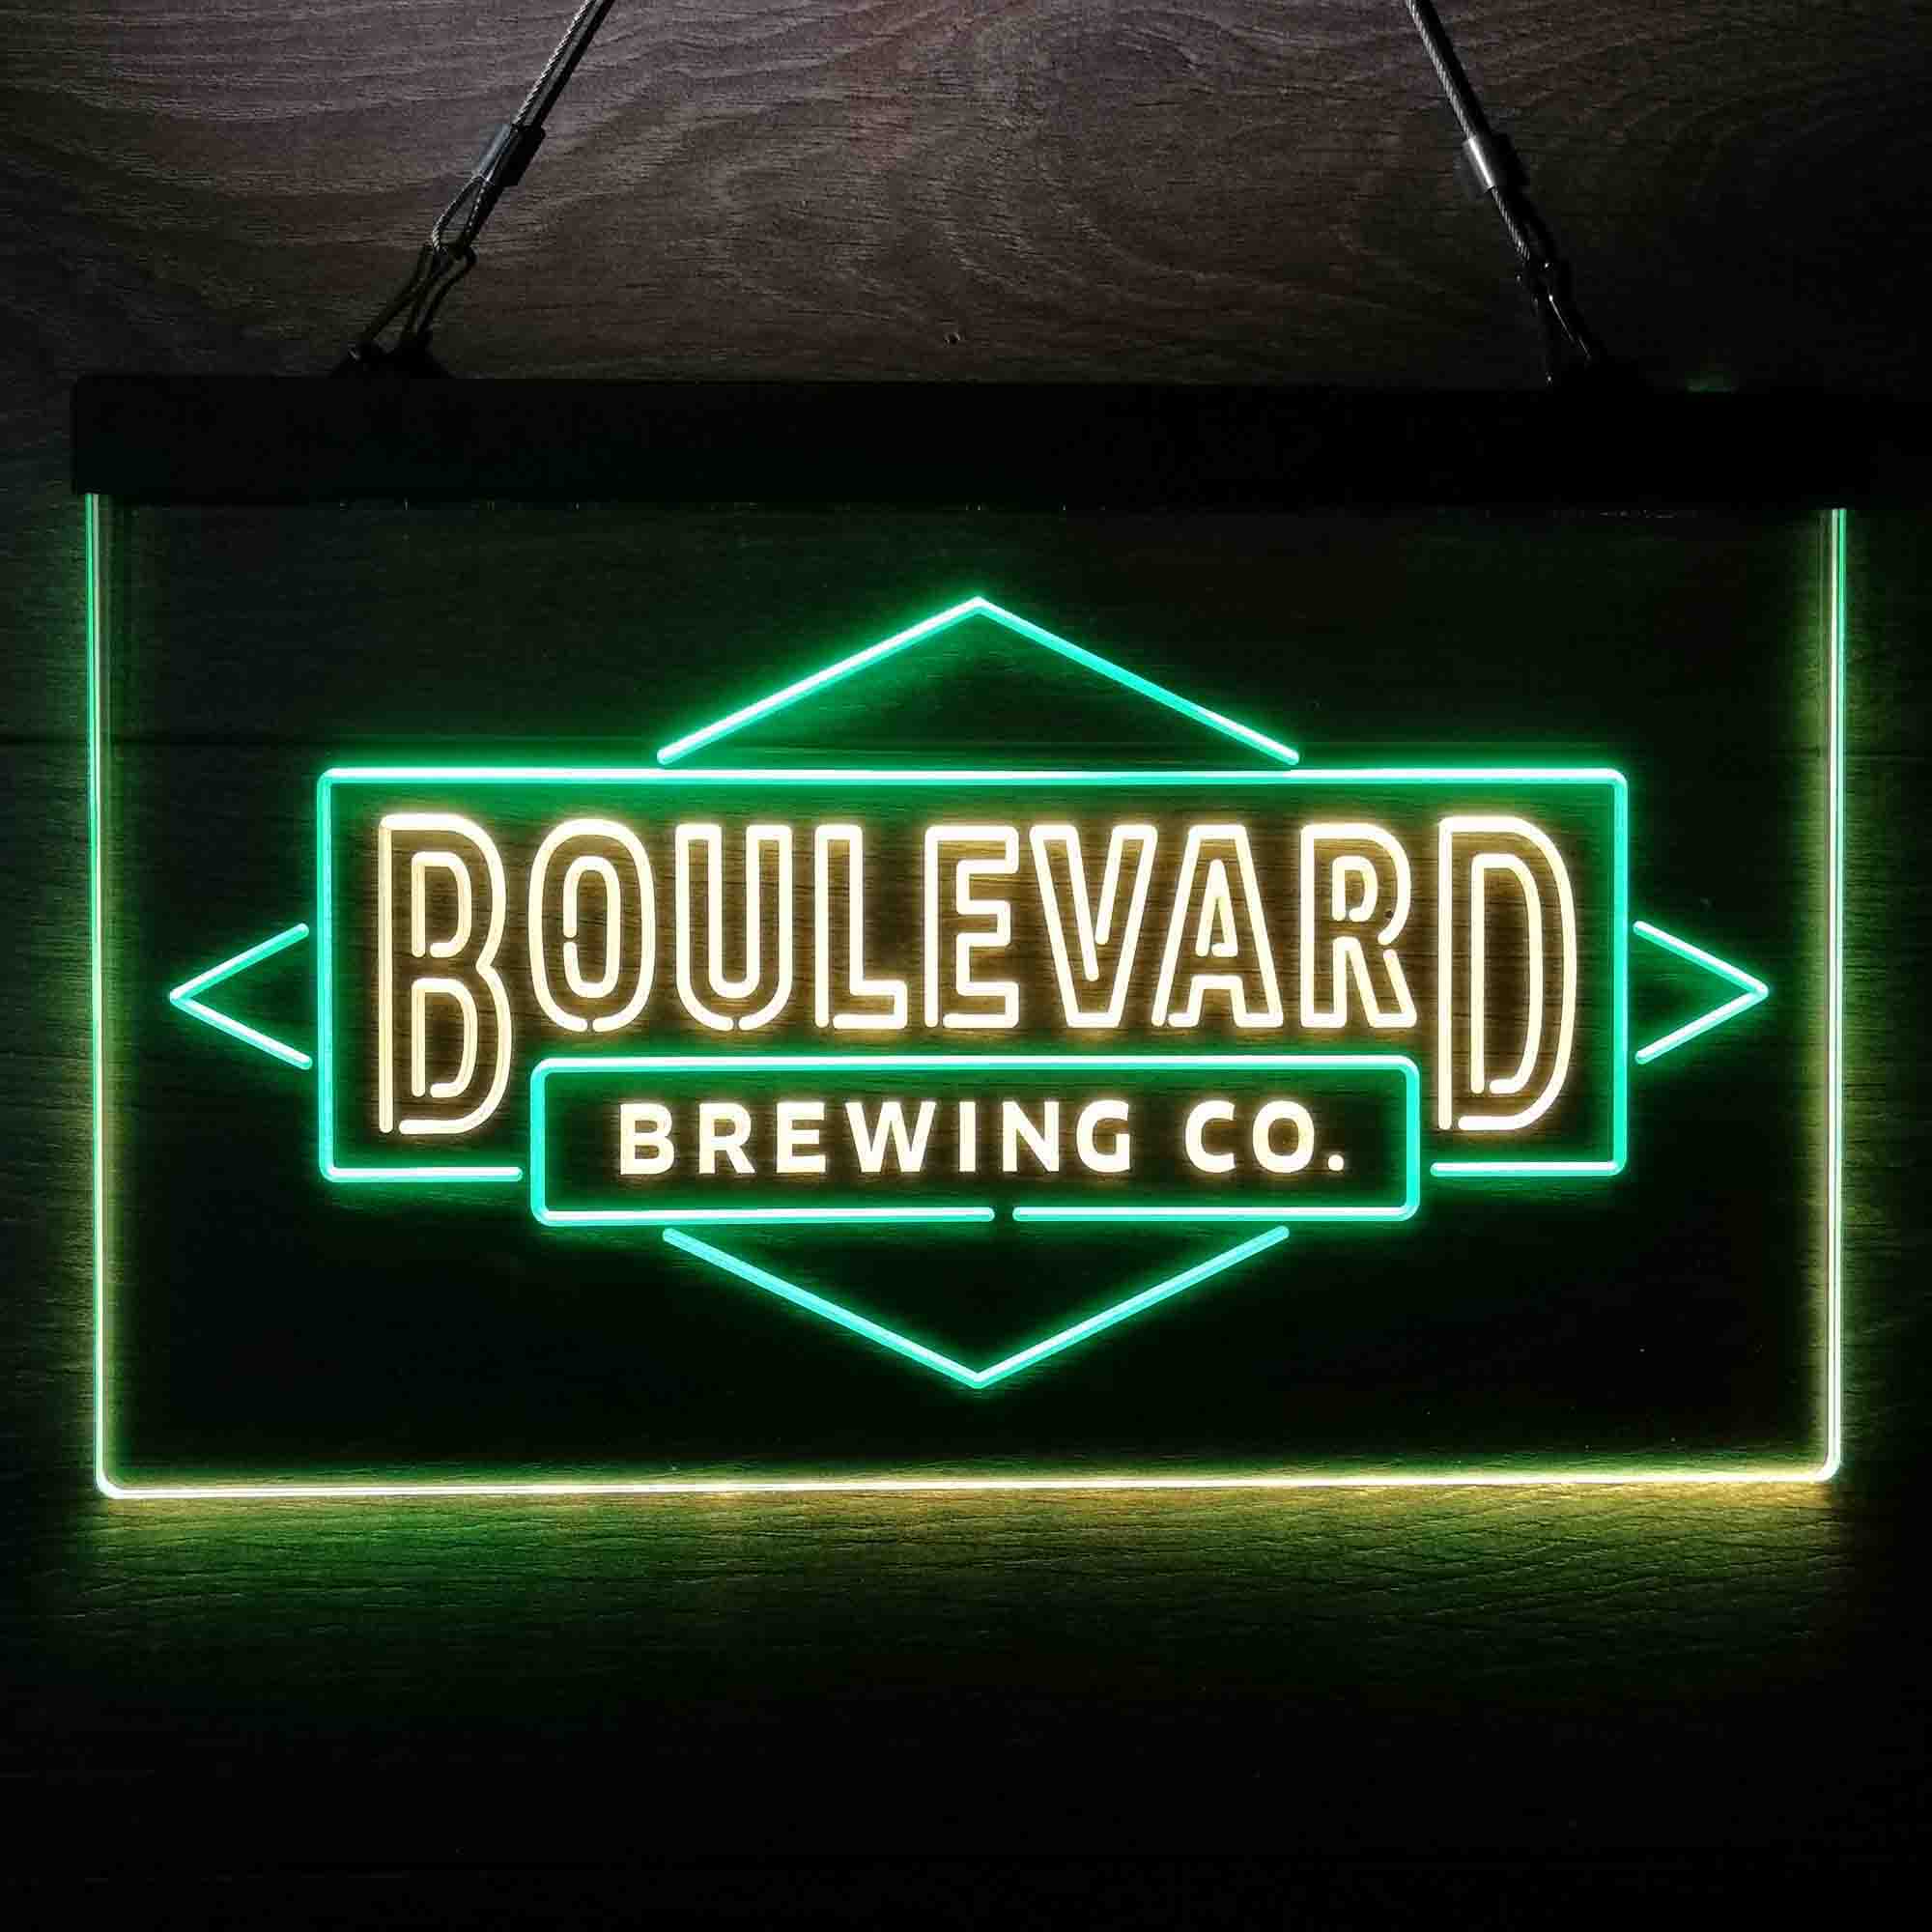 Boulevard Brewing Co. Neon-Like LED Sign - ProLedSign